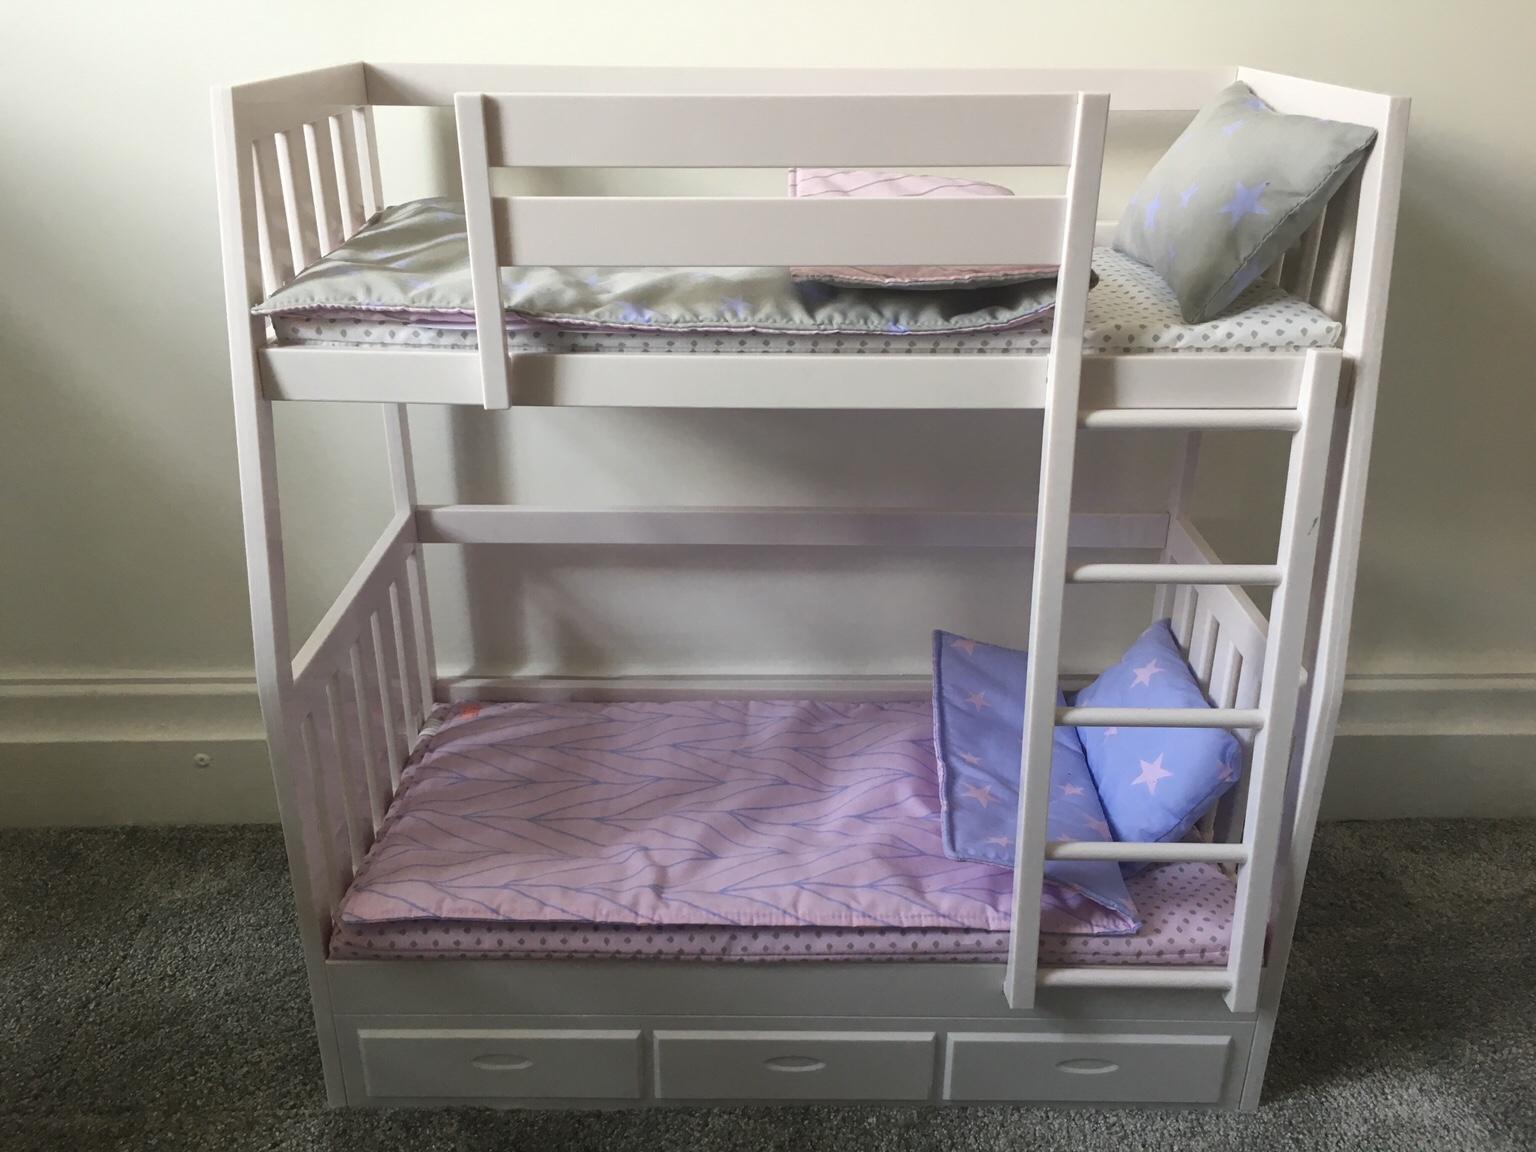 Our Generation Dream Bunk Beds In St, New Generation Bunk Beds